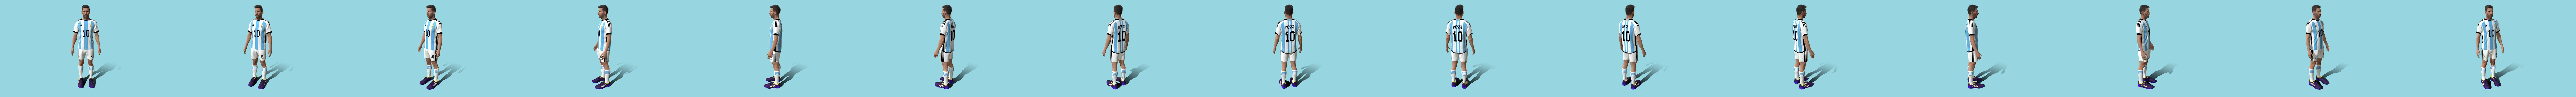 Argentina Messi New Jersey Design 2022 3D model rigged